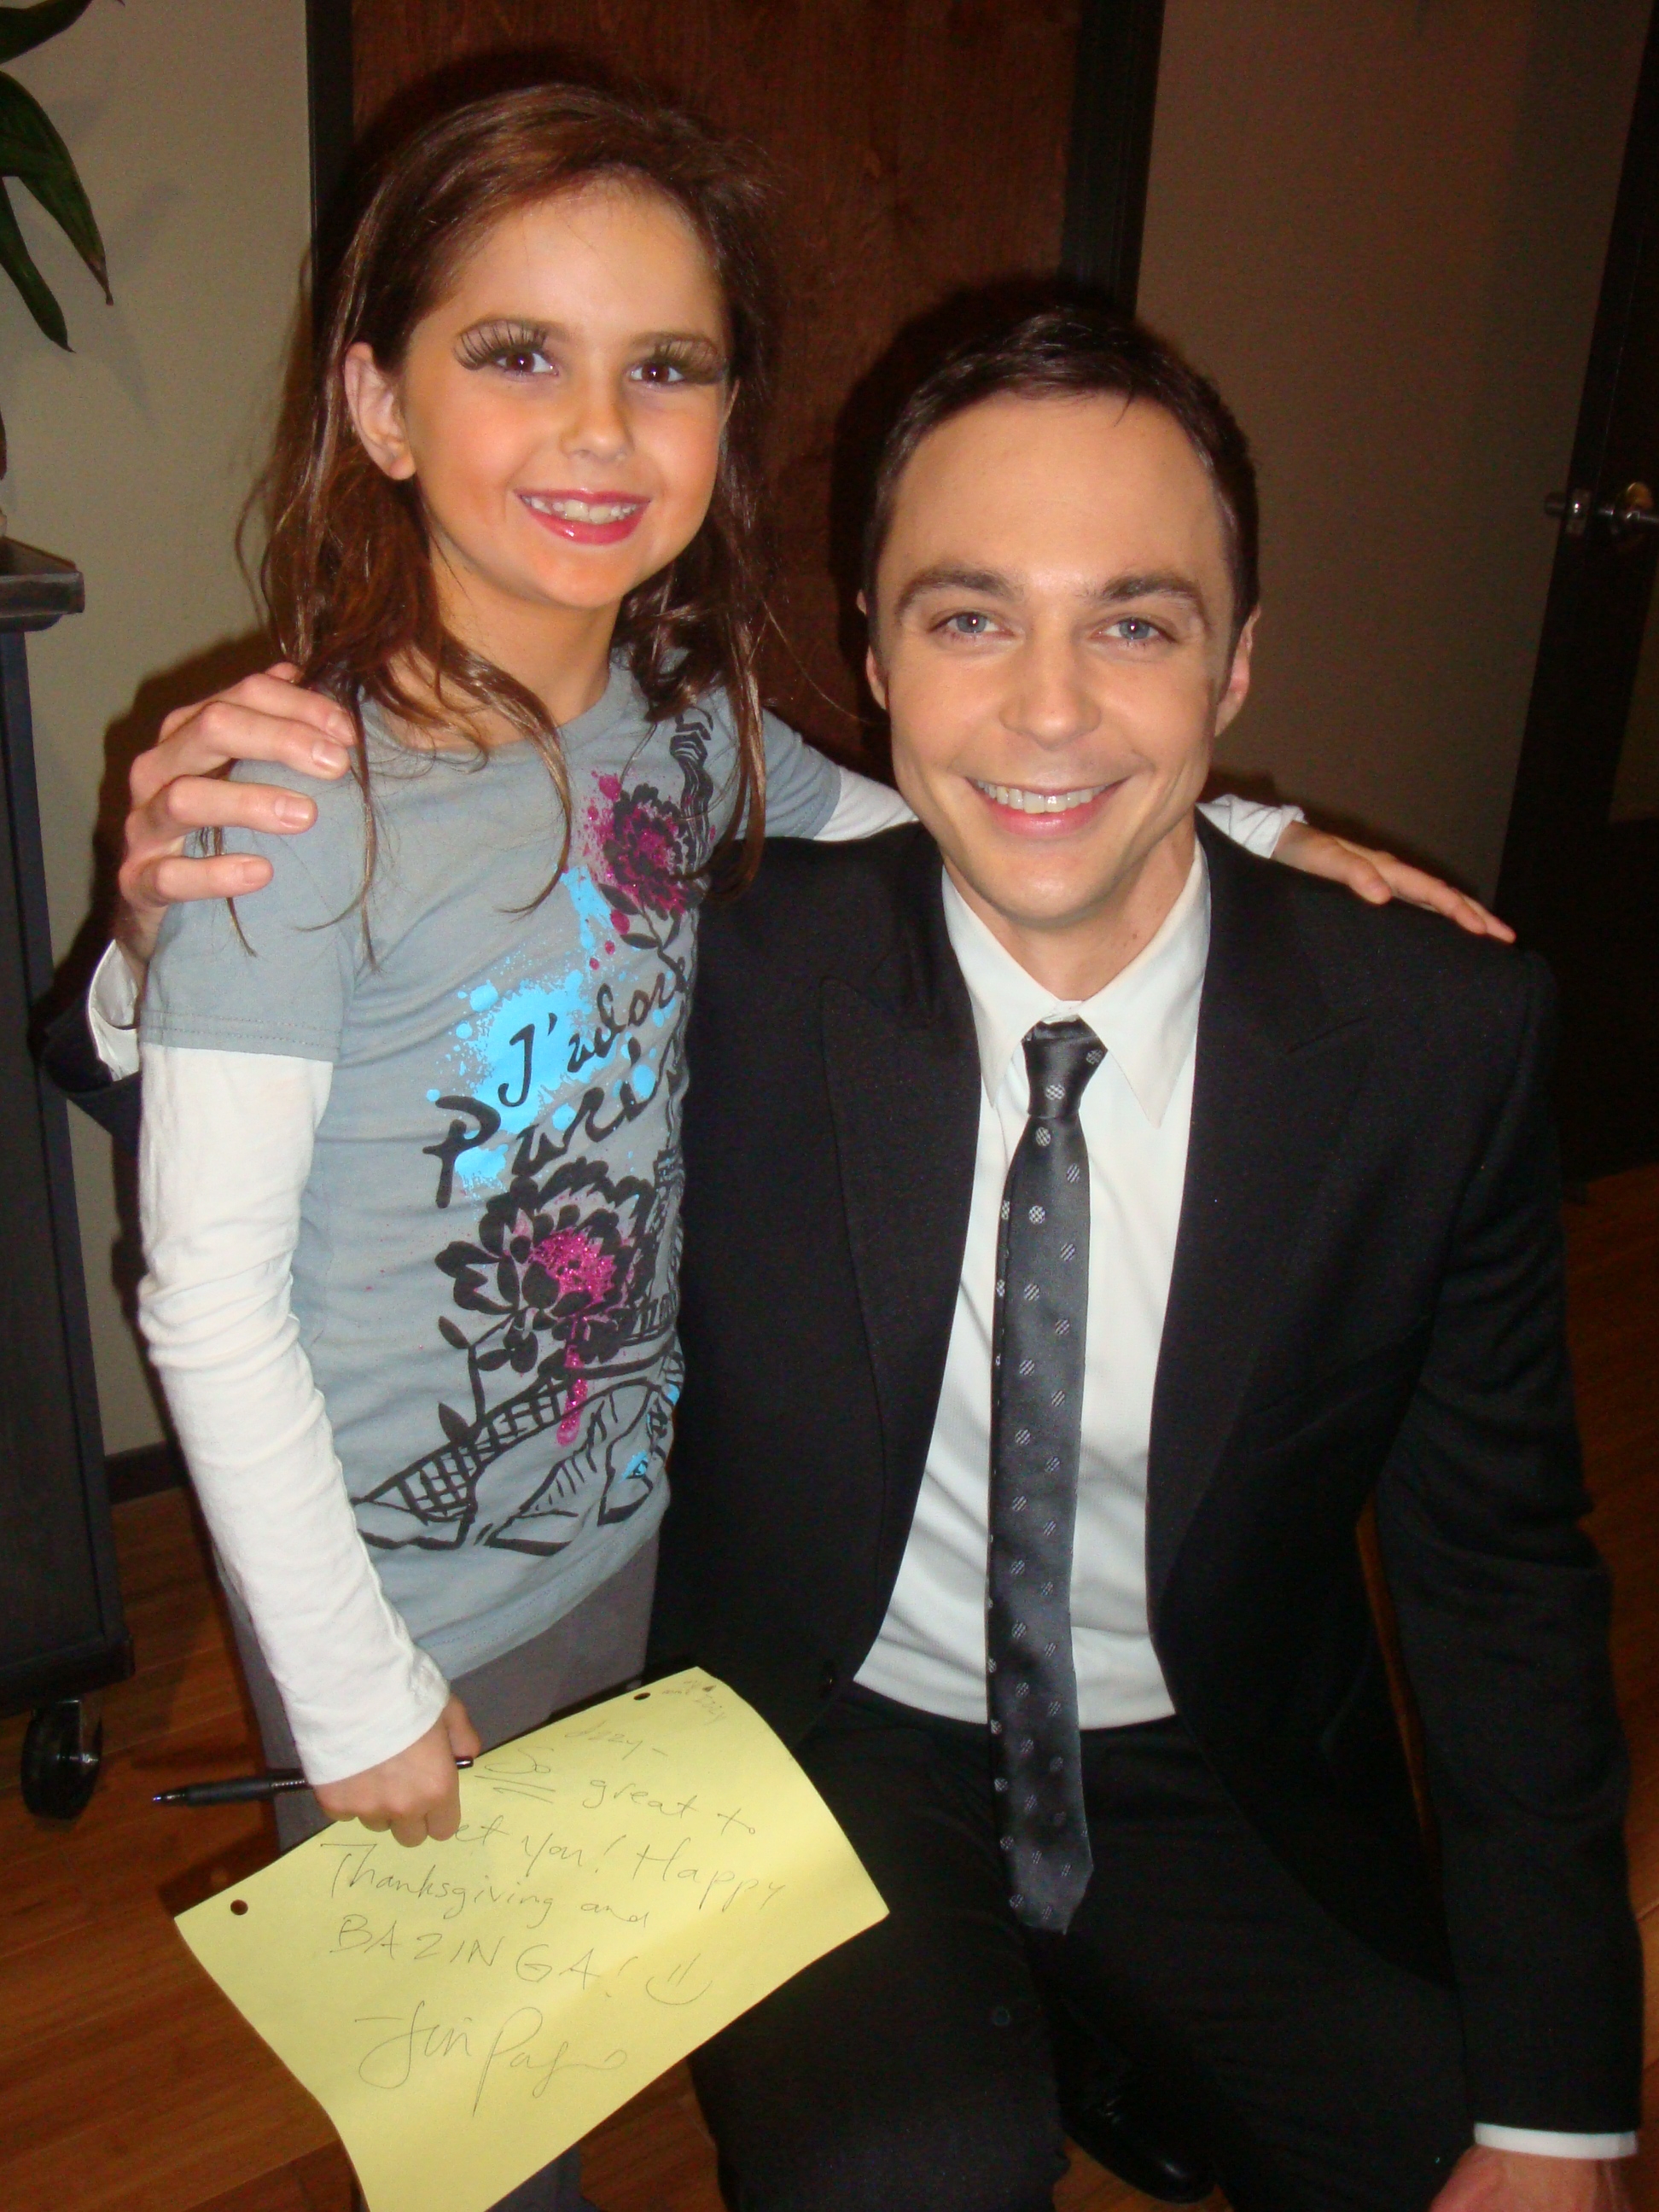 On the set of Conan with Jim Parsons.